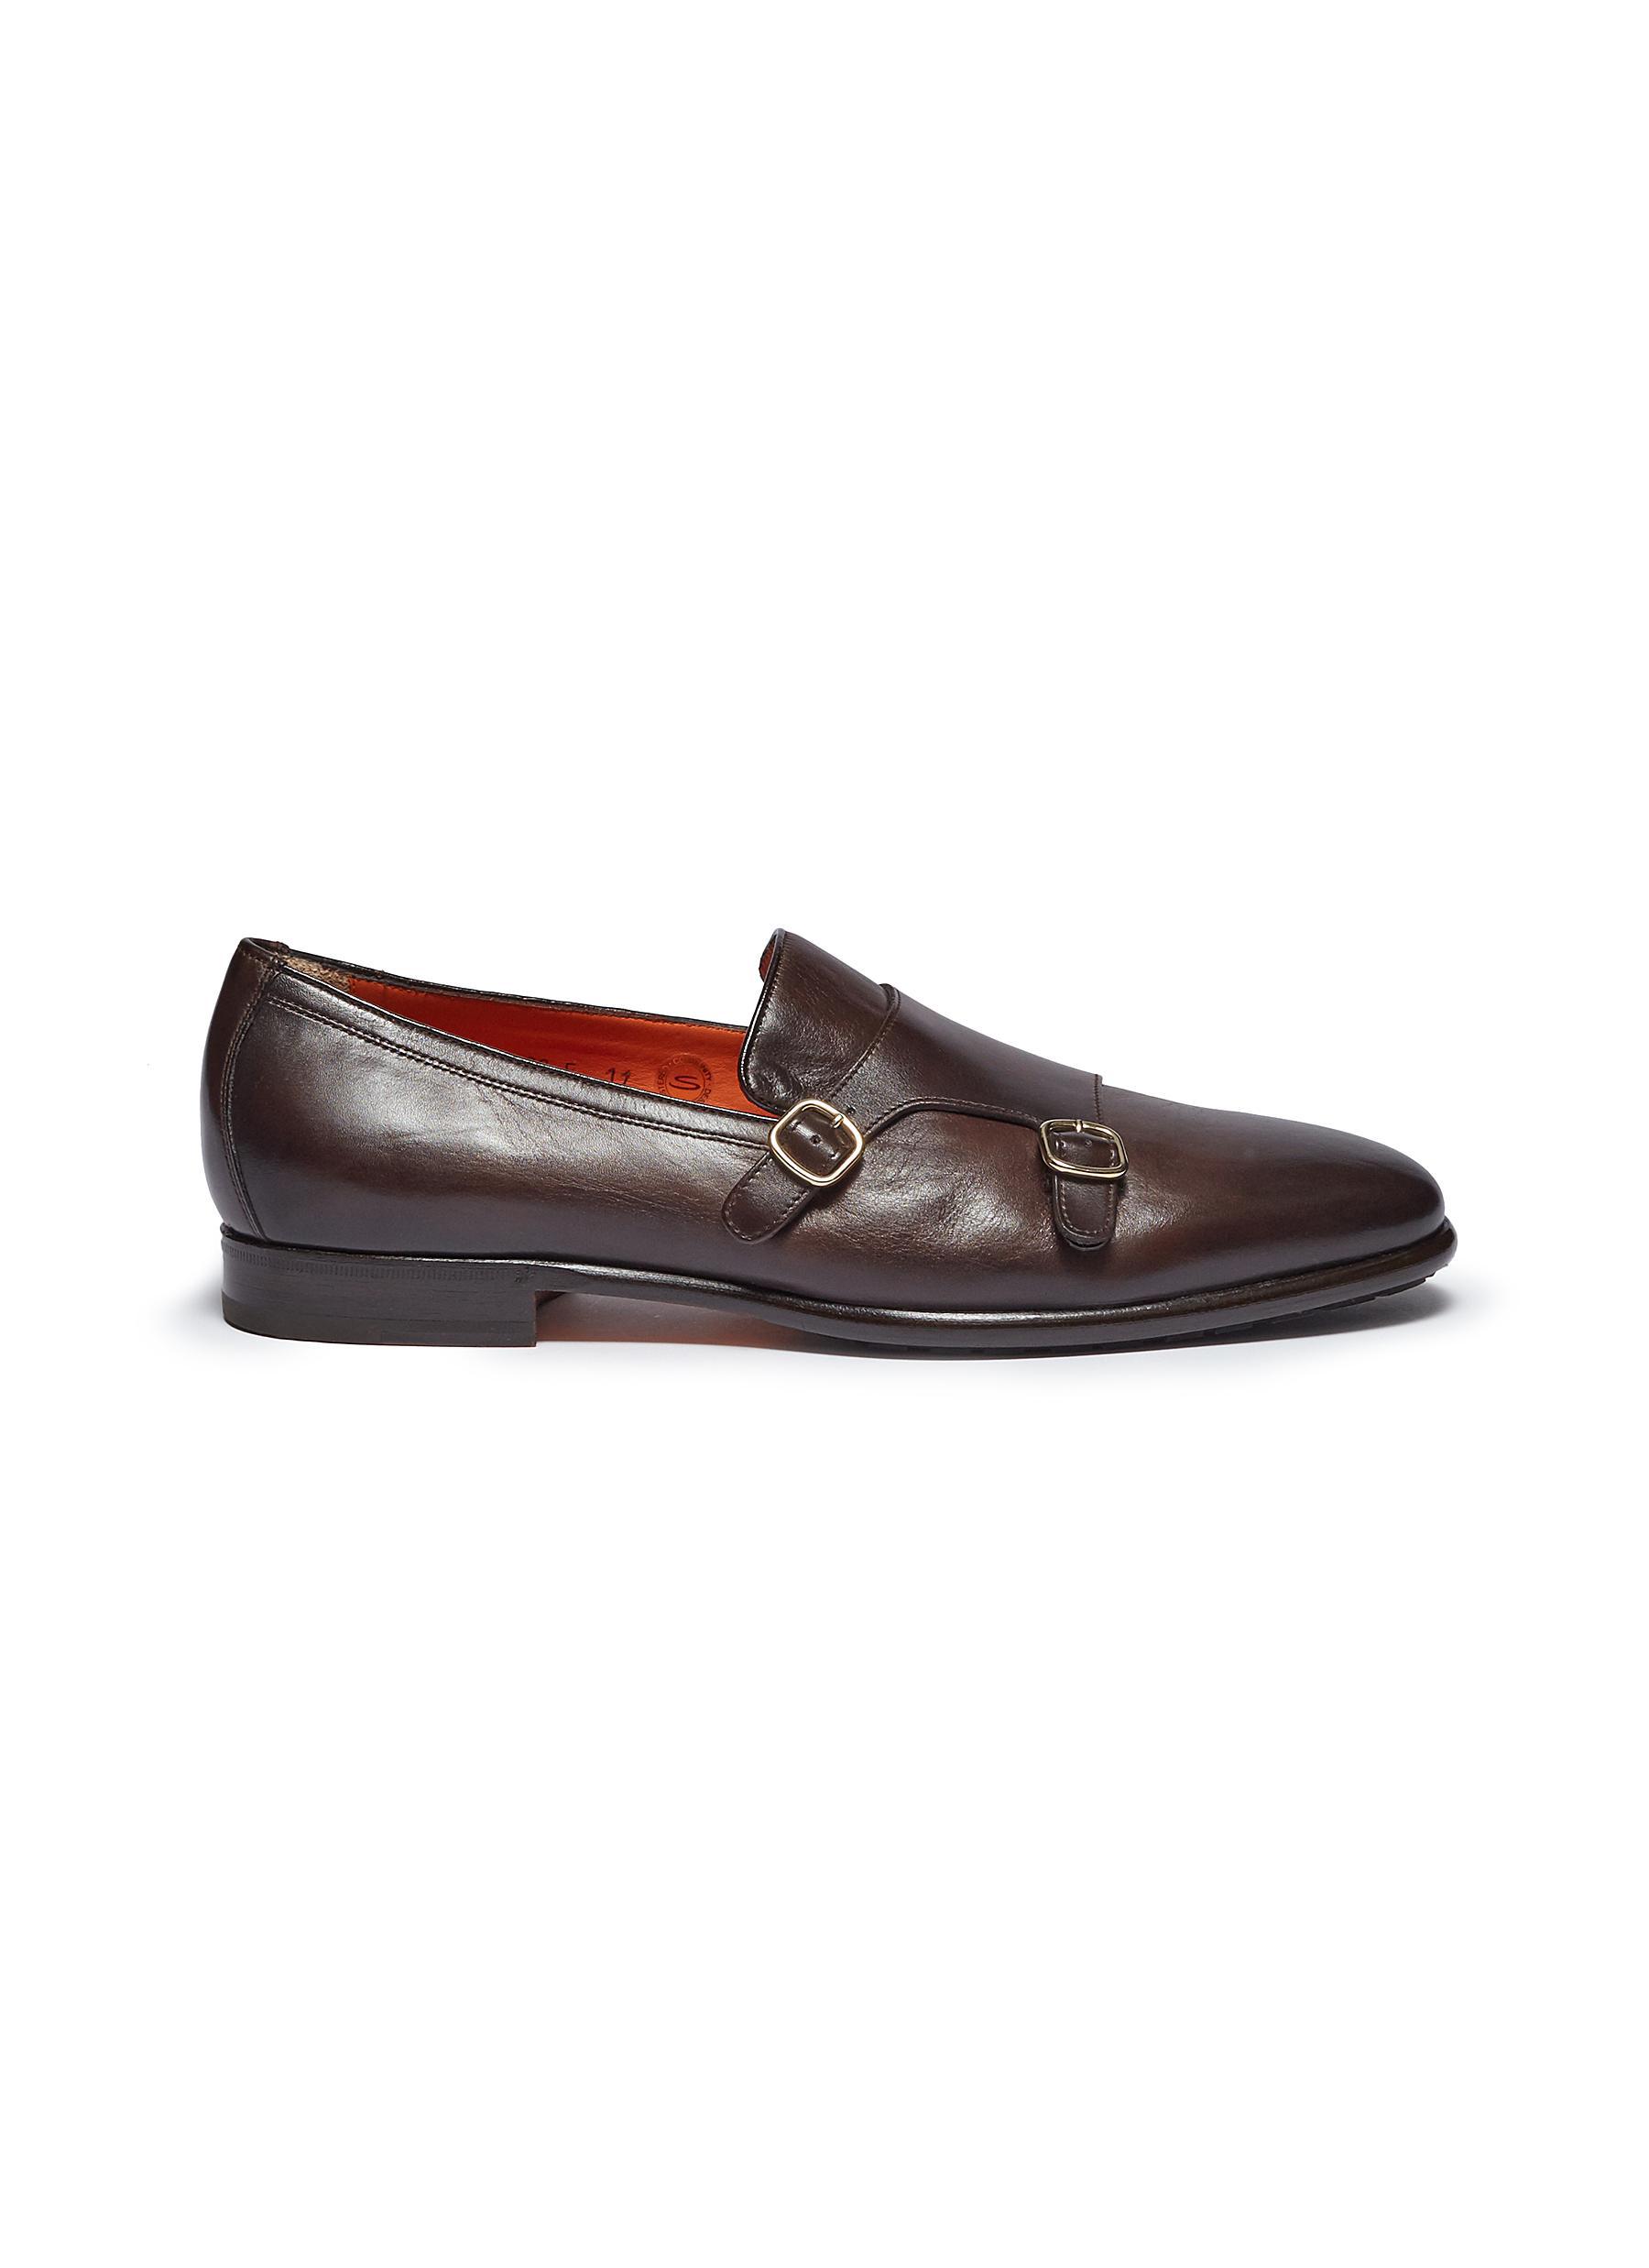 Santoni Double Monk Strap Leather Loafers in Dark Brown (Brown 